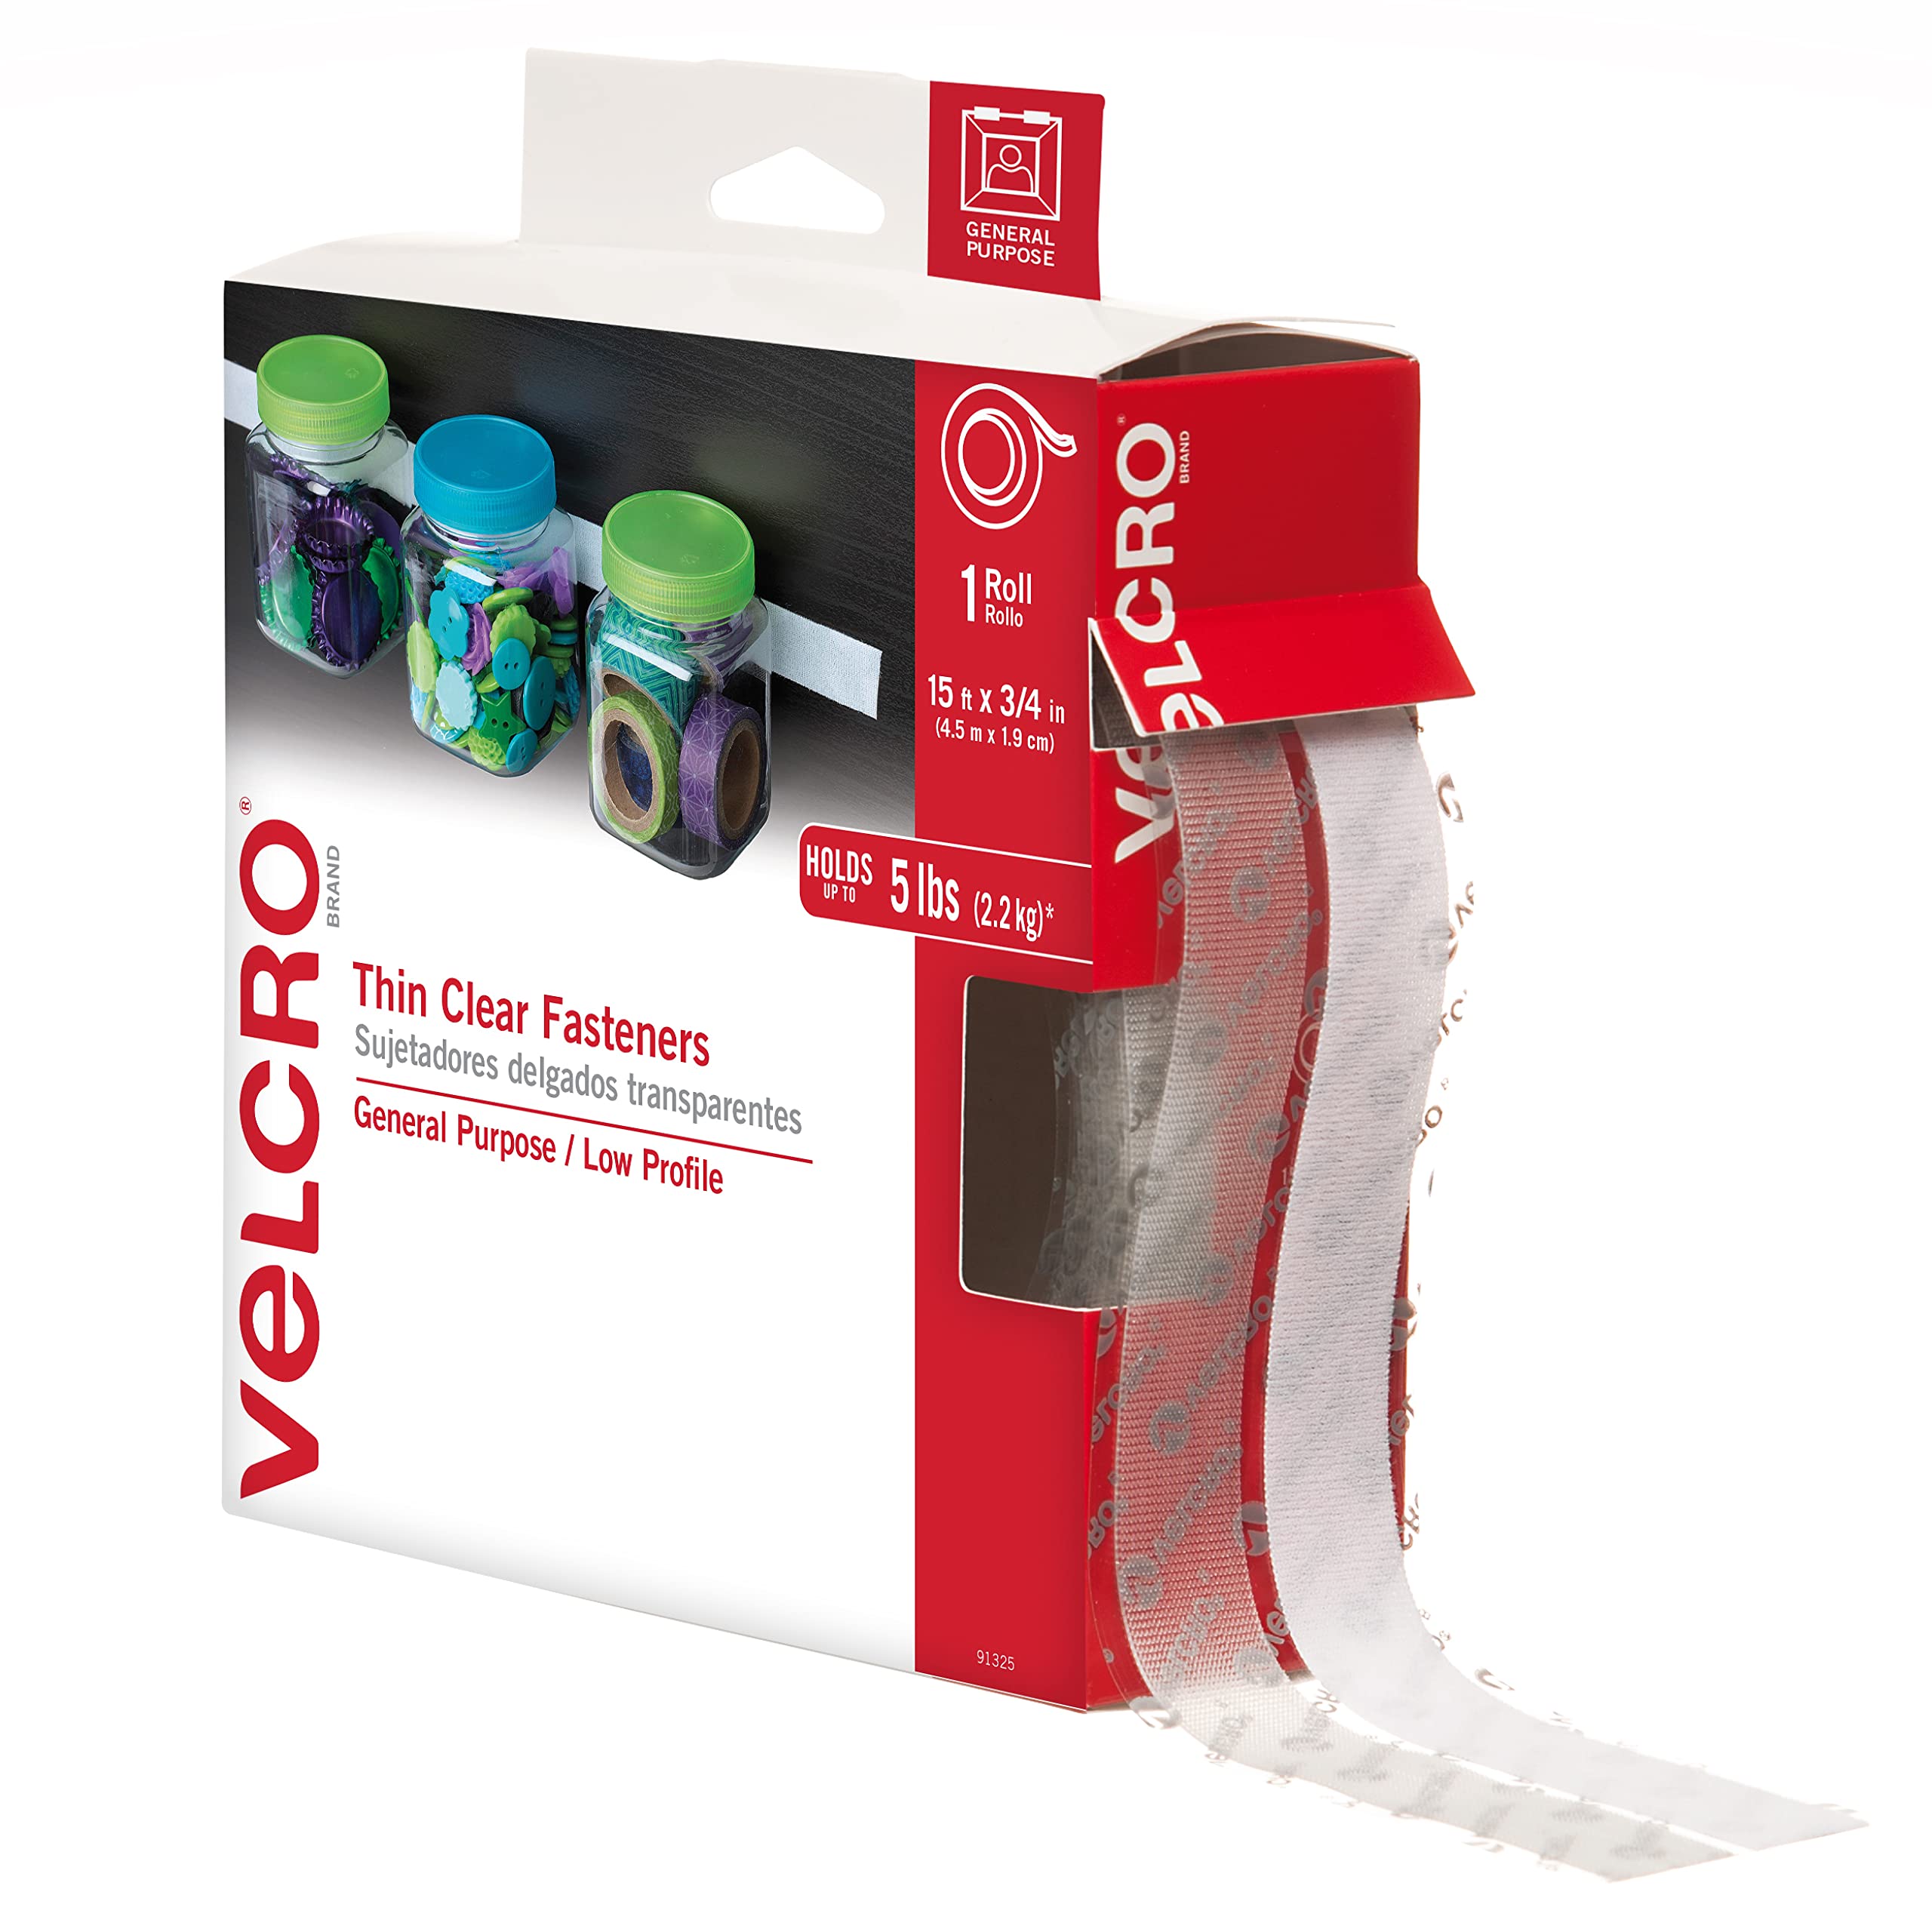 VELCRO Brand Mounting Circles, Adhesive Sticky Back Hook and Loop  Fasteners for Home, Office or Crafting